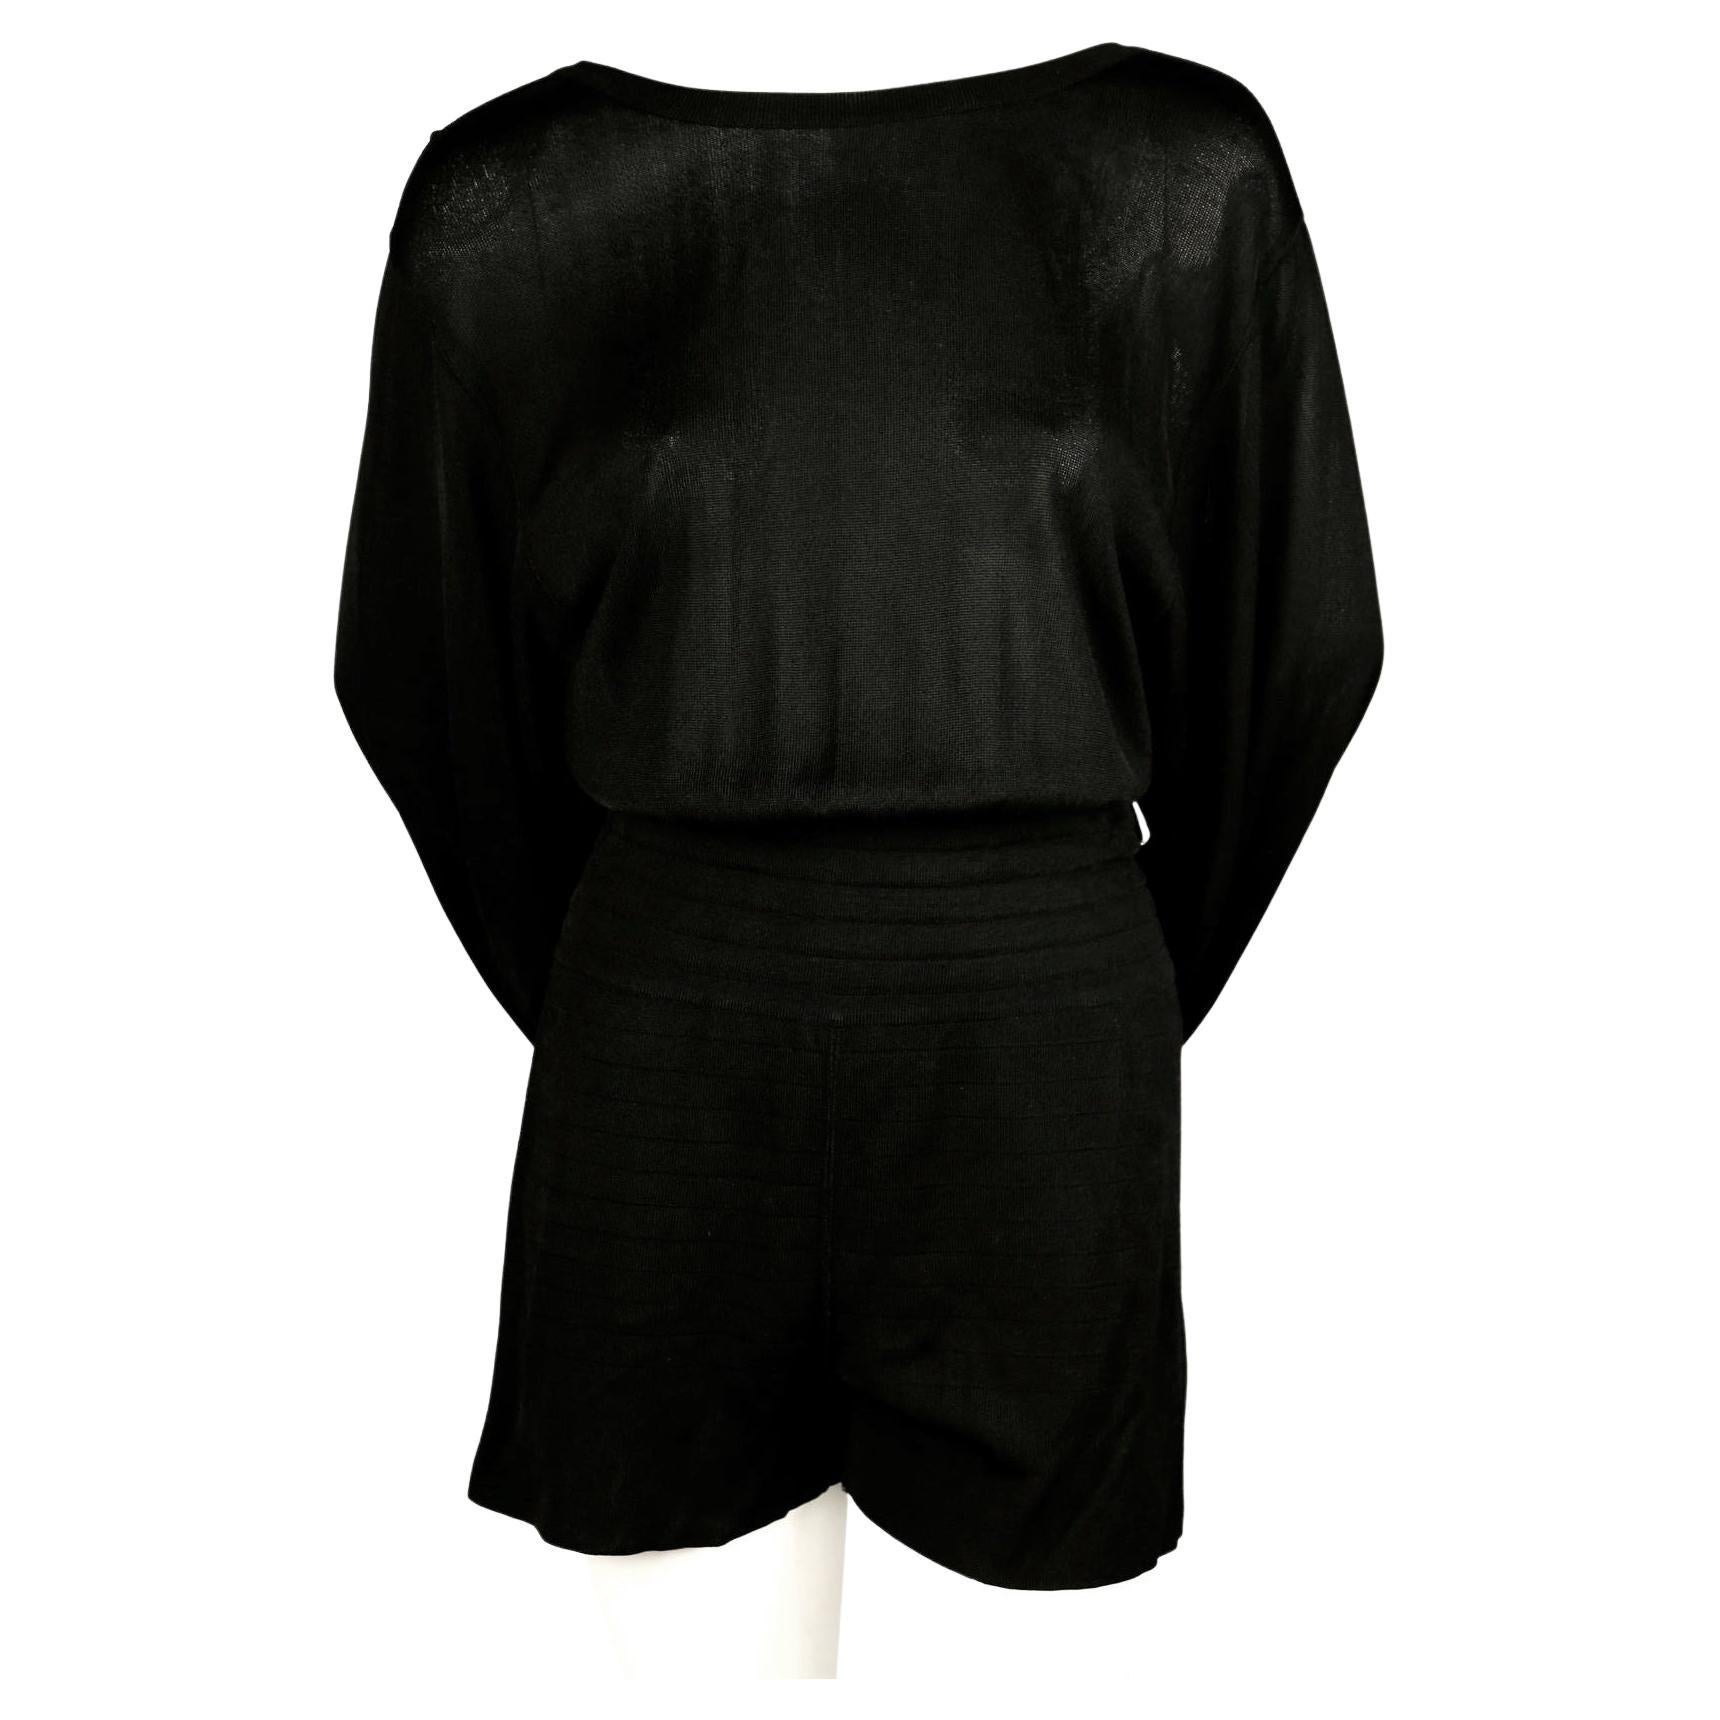 Jet-black summer playsuit with matching skirt that cleverly hooks onto waistband to create a unique draped silhouette designed by Azzedine Alaia dating to the late 1980's. Looks great worn during day or night. Would be a wonder travel piece. Labeled